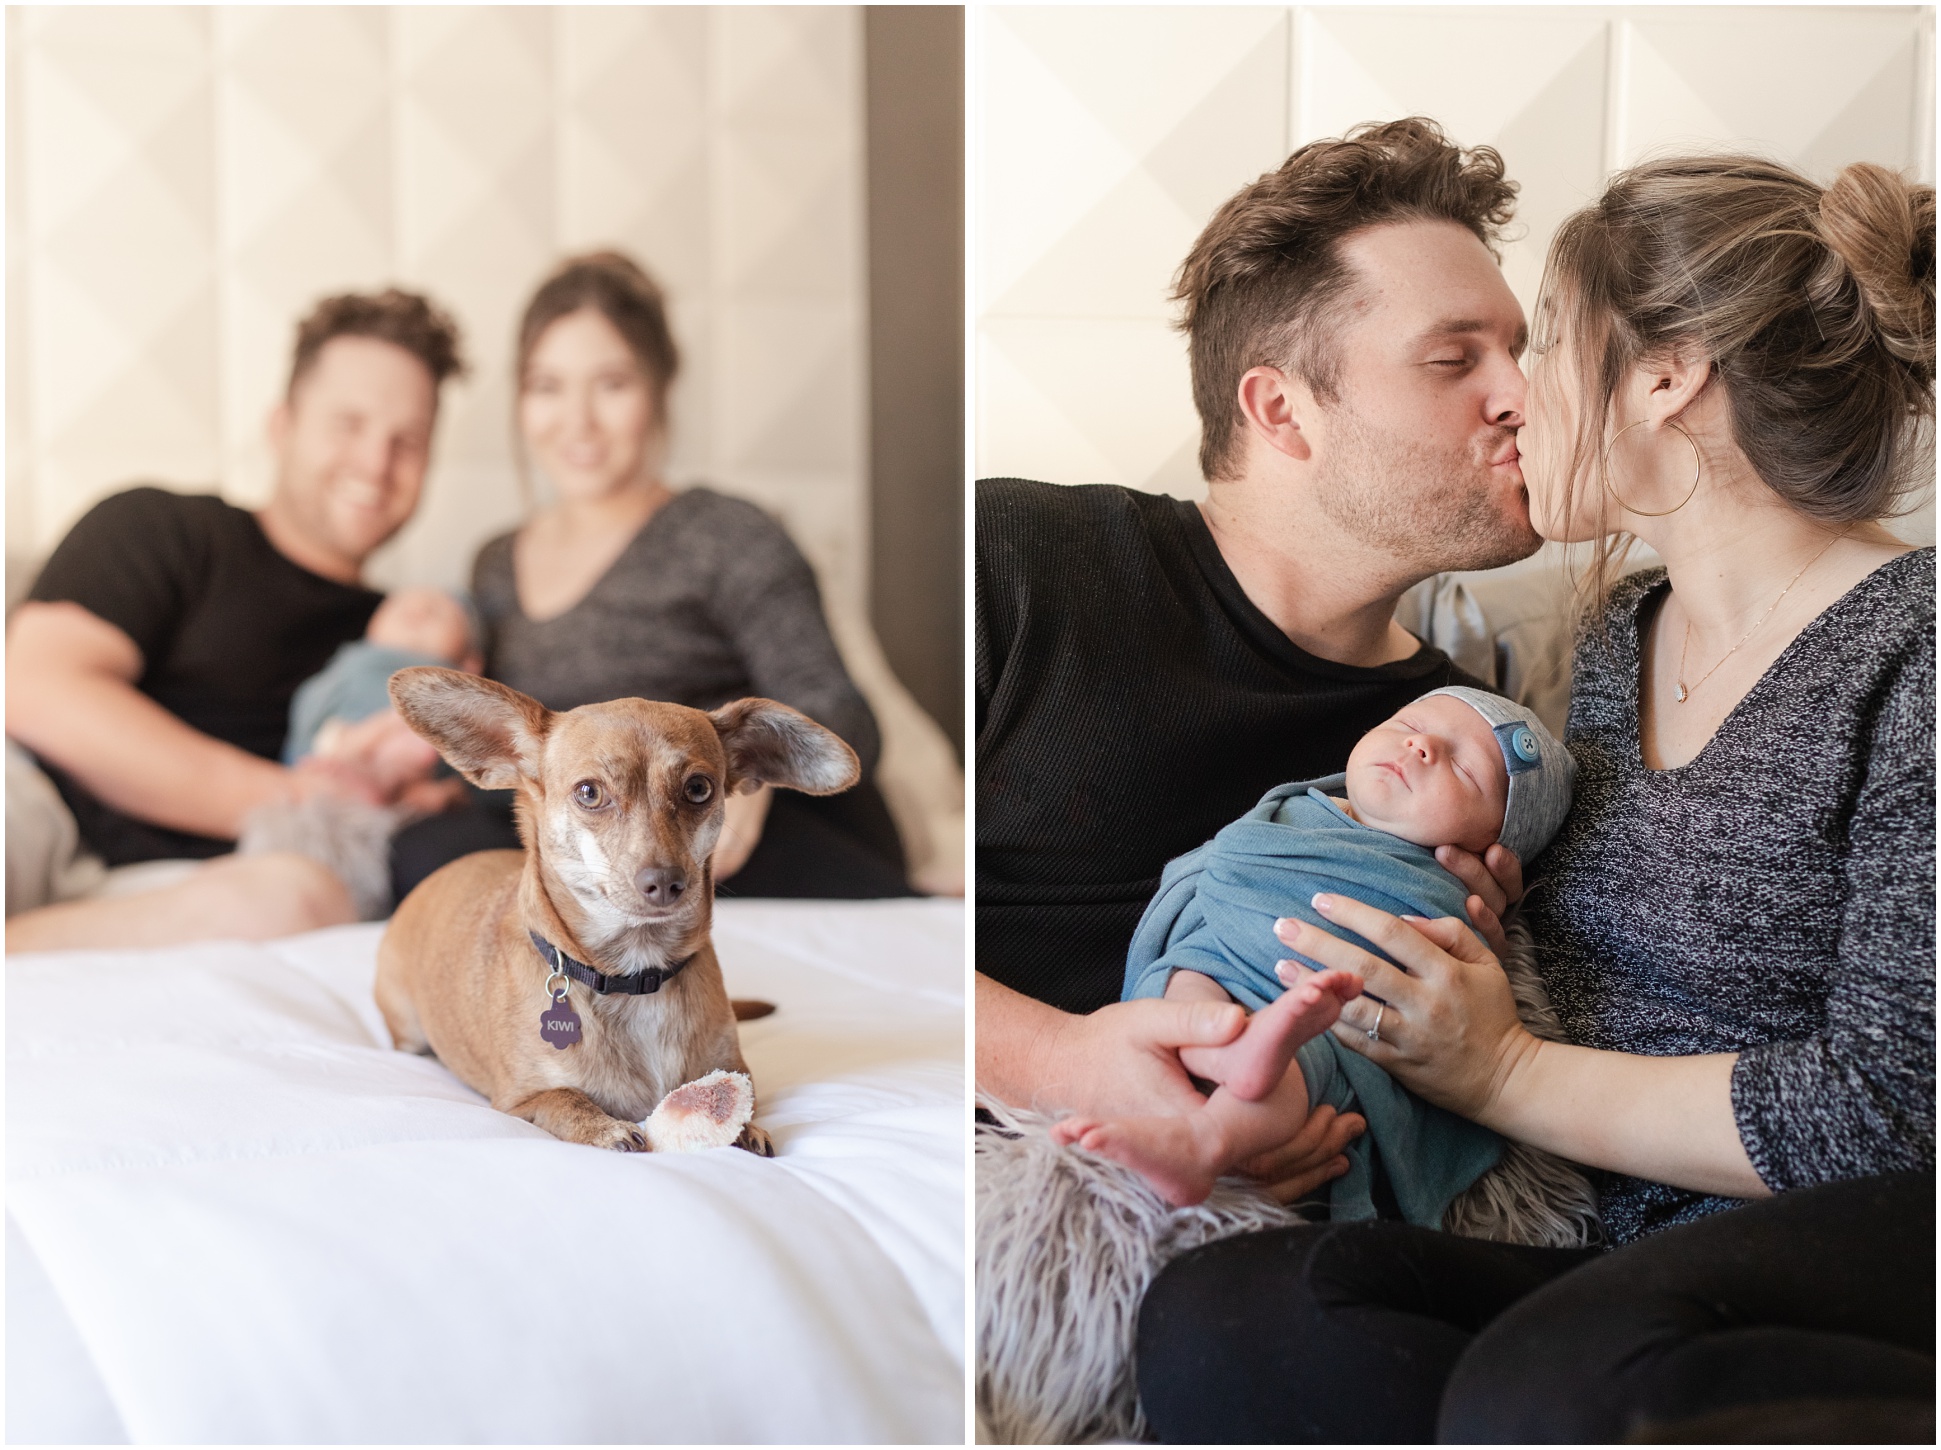 family dog in focus on bed with mom dad and newborn smiling in background; mom and dad kissing while holding baby in between them